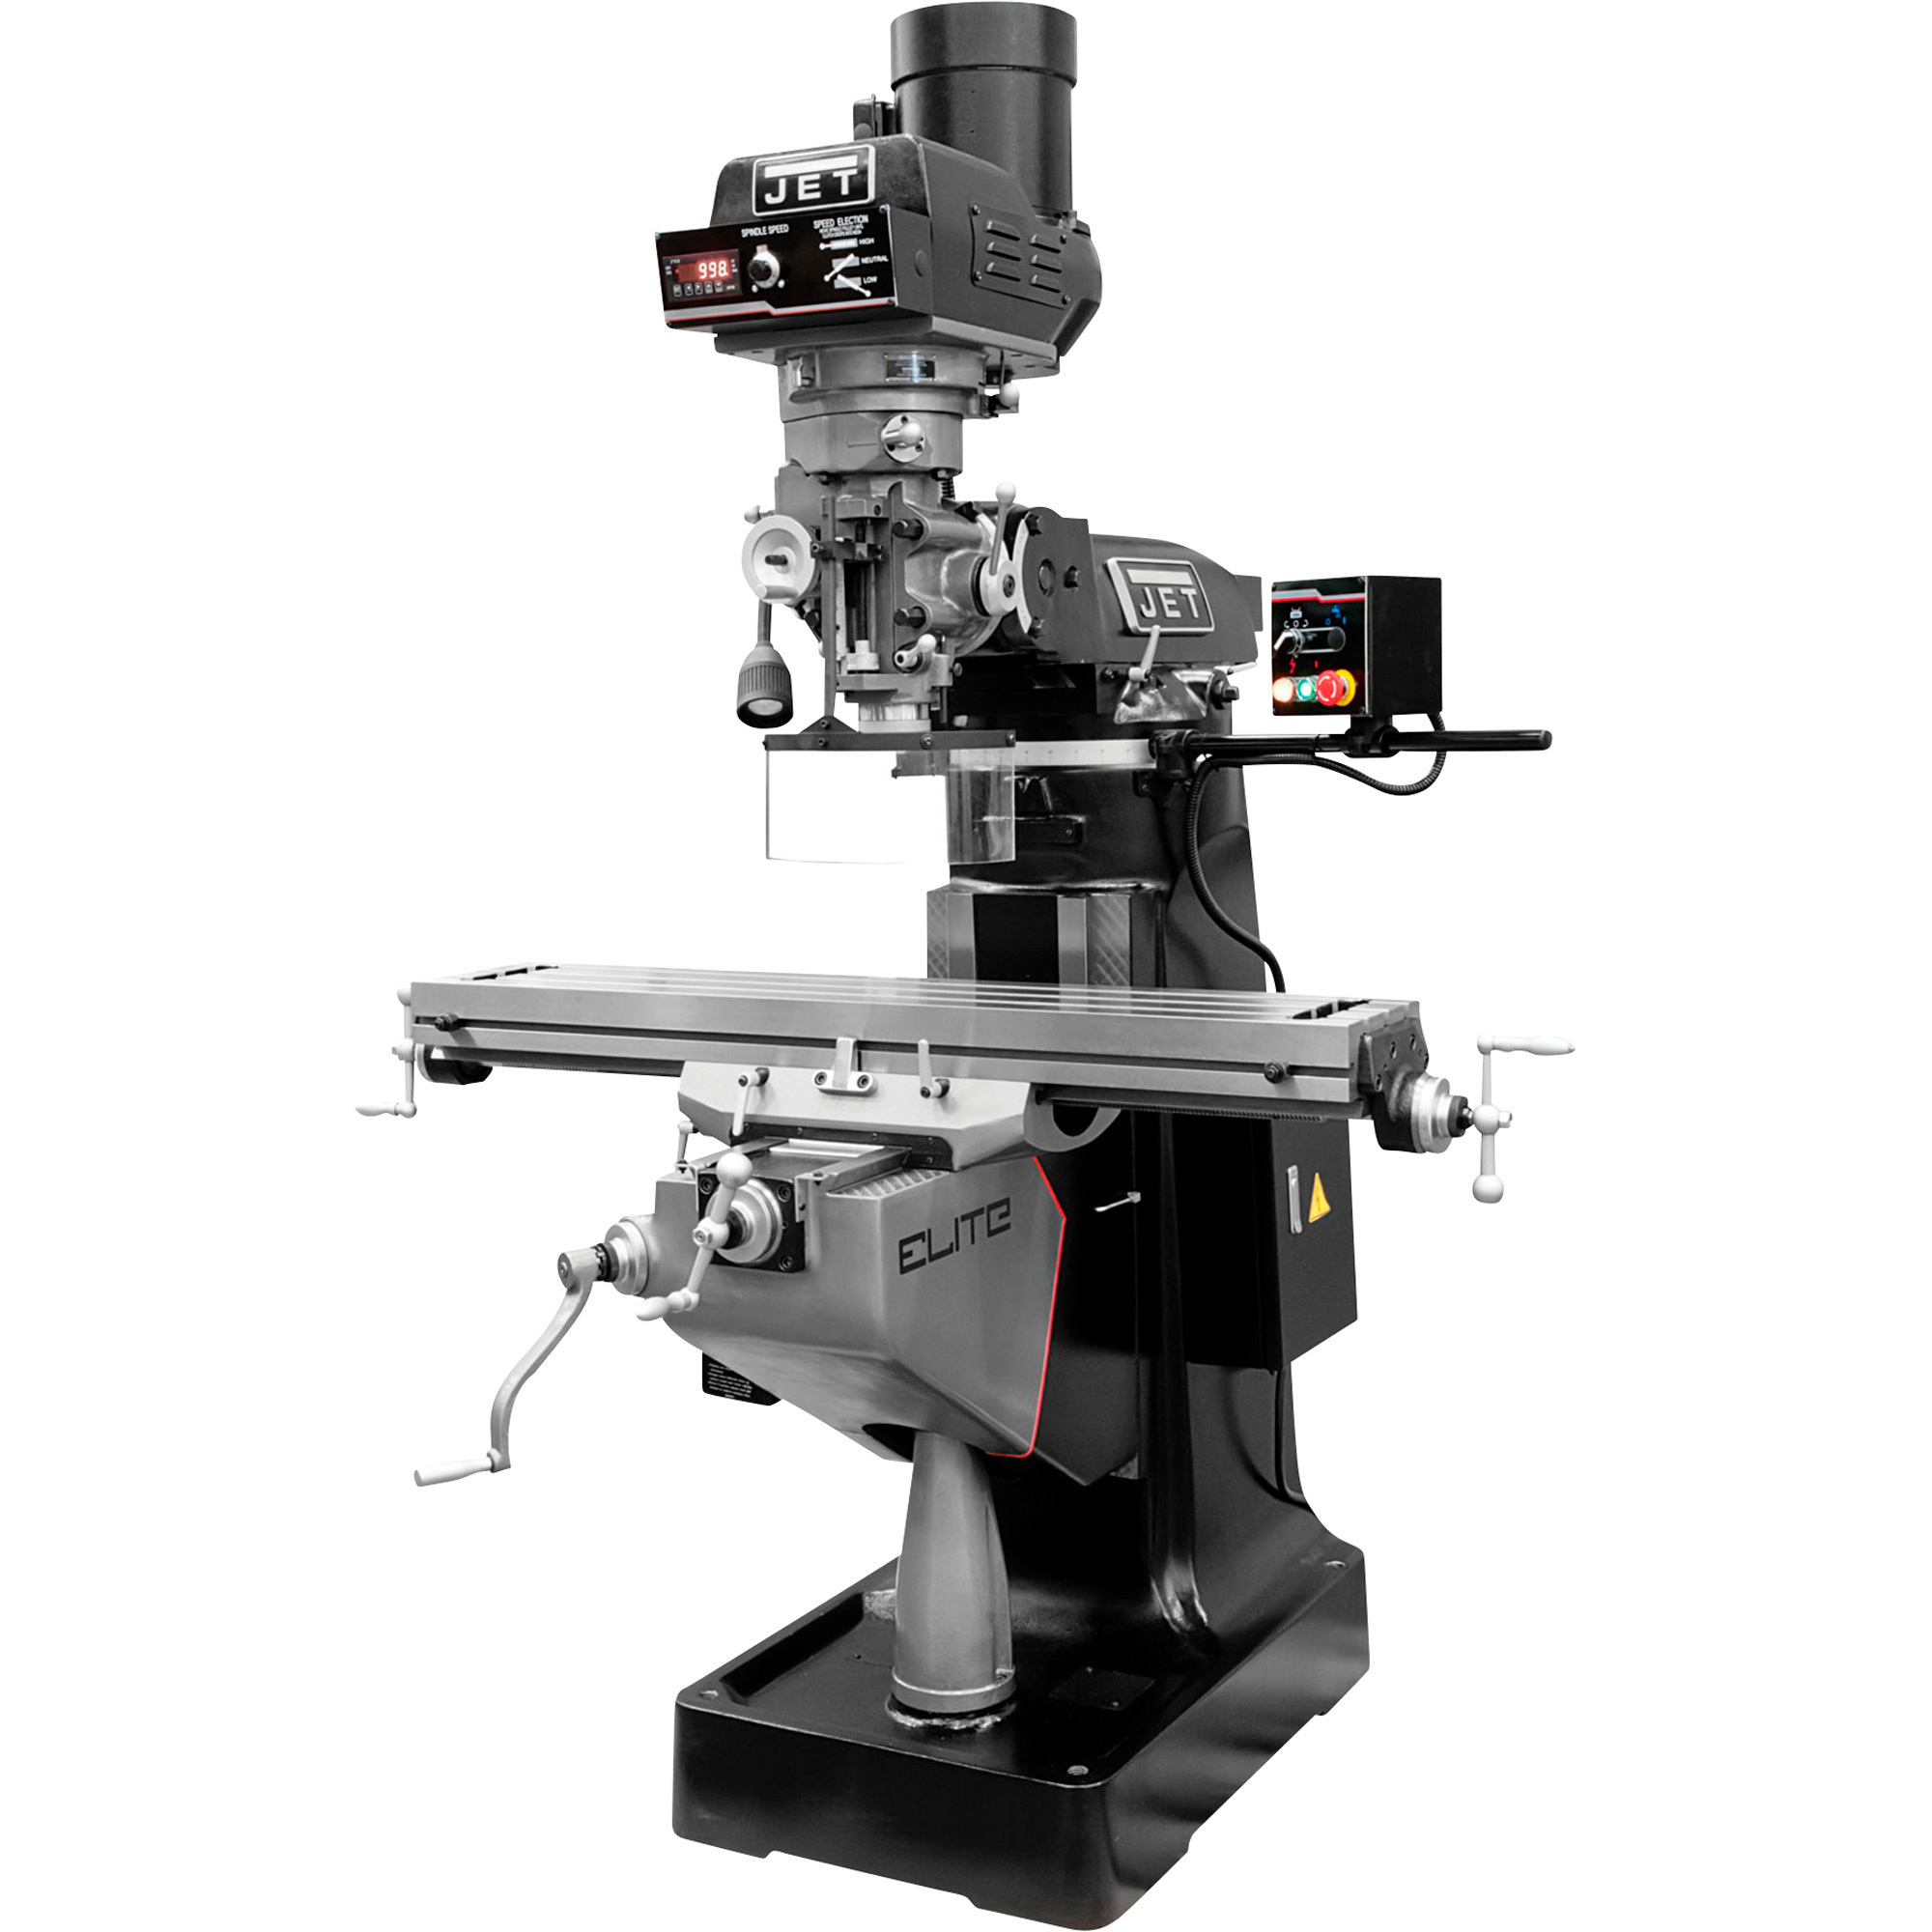 JET Elite Metalworking Mill with 3-Axis ACU-RITE 203 (Quill) DRO, Servo X, Y, Z-Axis Powerfeeds and USA Air Powered Draw Bar — Model EVS-949 -  894392